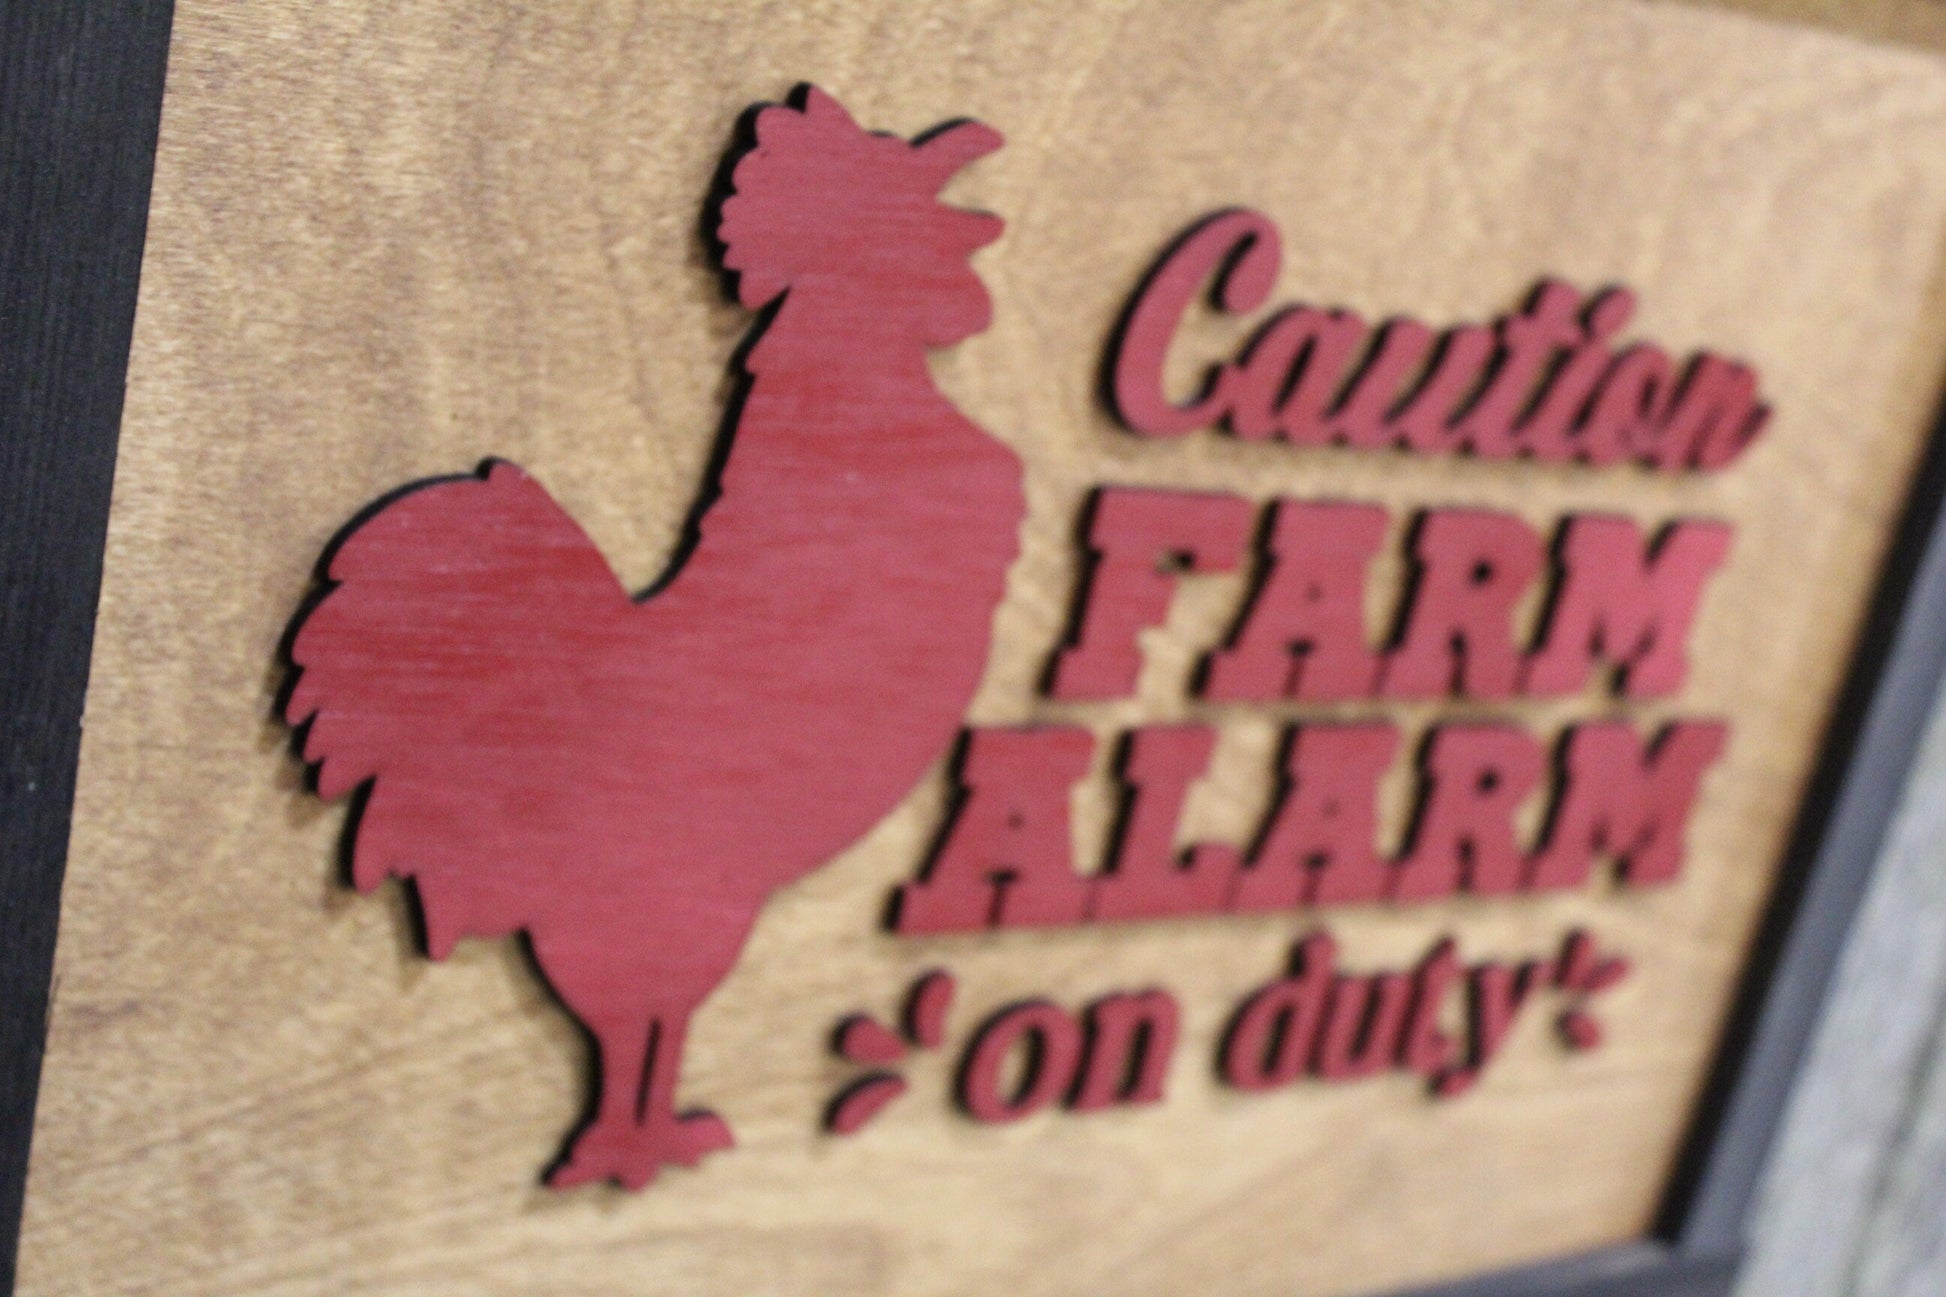 Rooster Alarm Clock Wood Sign Caution Farm Alarm On Duty Chicken Wood Sign 3D Raised Text Rustic Country Cabin Wall Art Dining Room Red